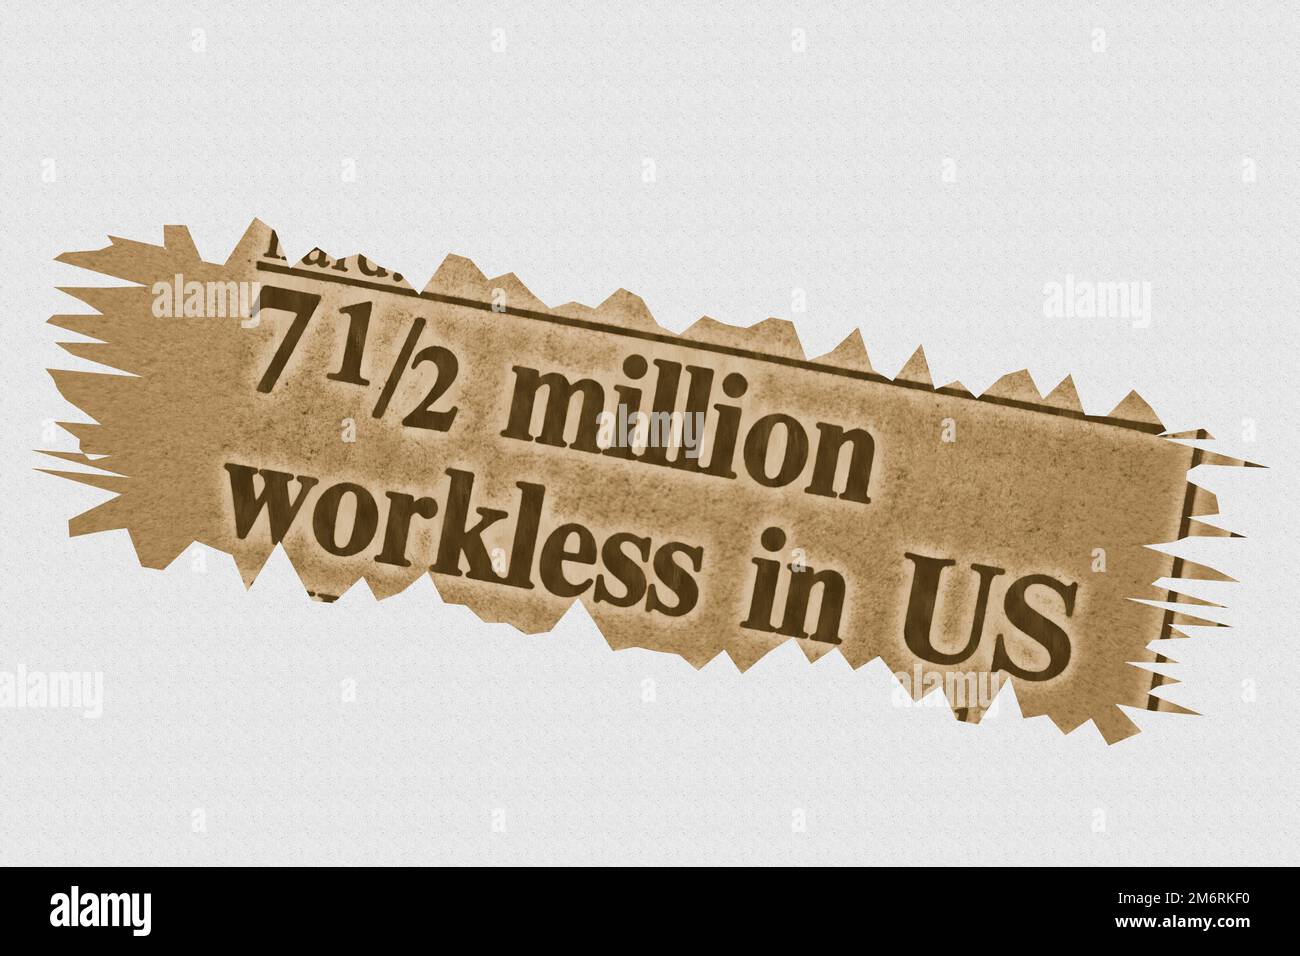 7.5 million workless in US  - news story from 1975 newspaper headline article title with highlighted overlay Stock Photo